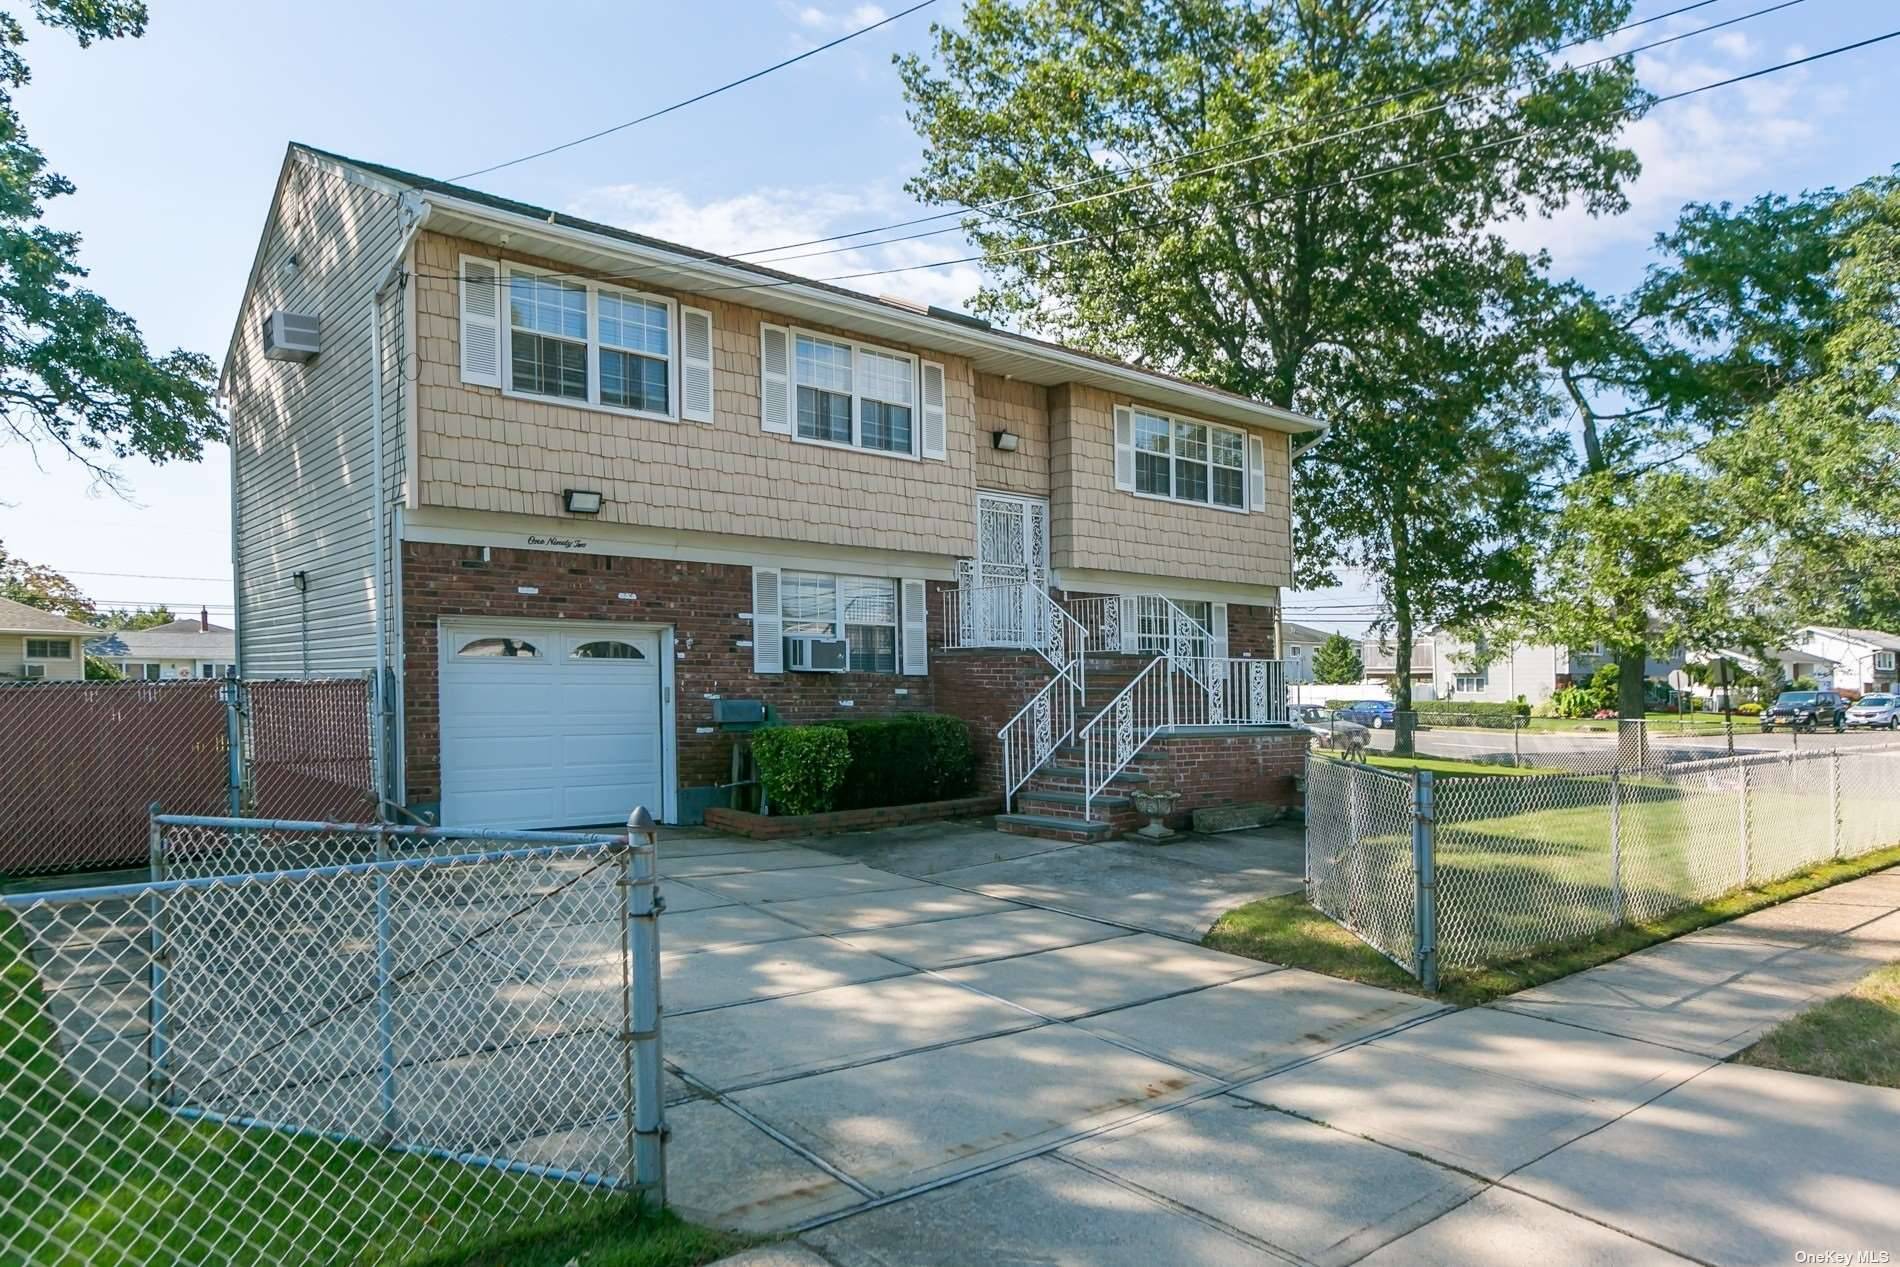 Welcome to this spacious Hi Ranch in the heart of Massapequa.